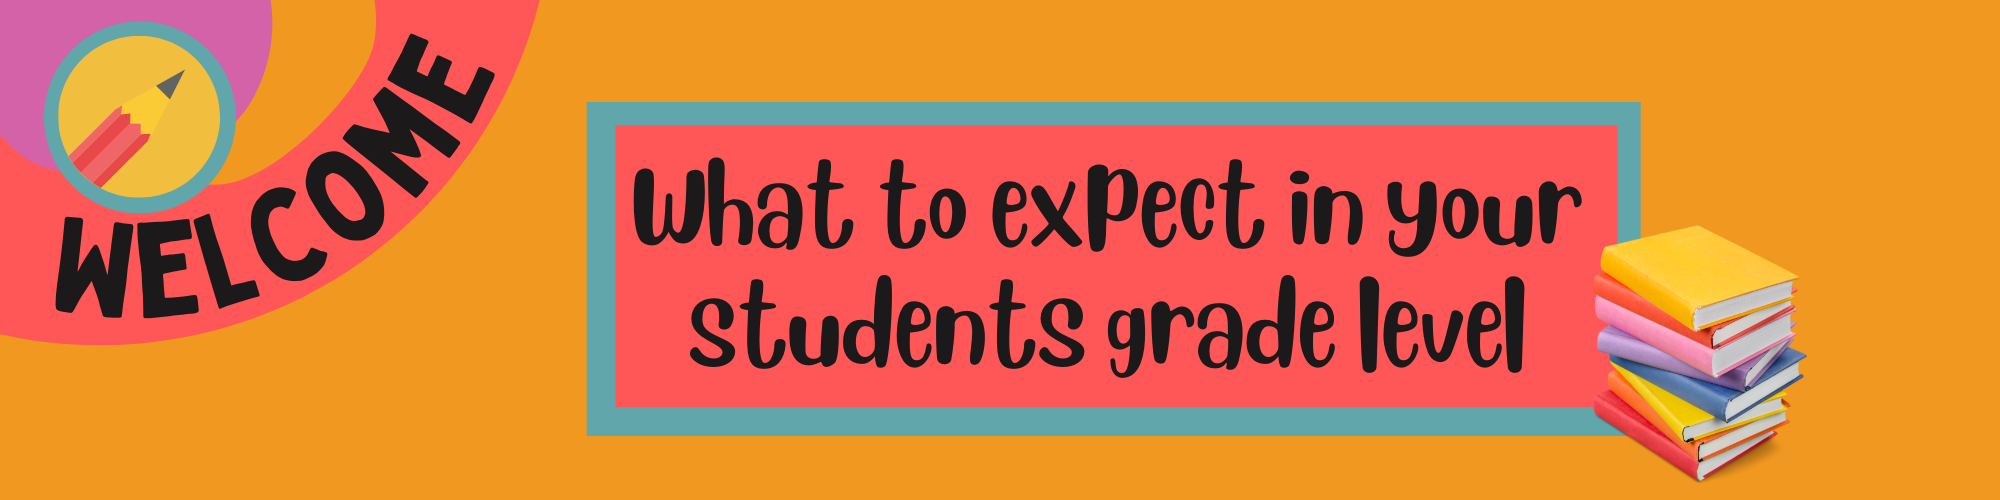 What to expect in your students grade level banner